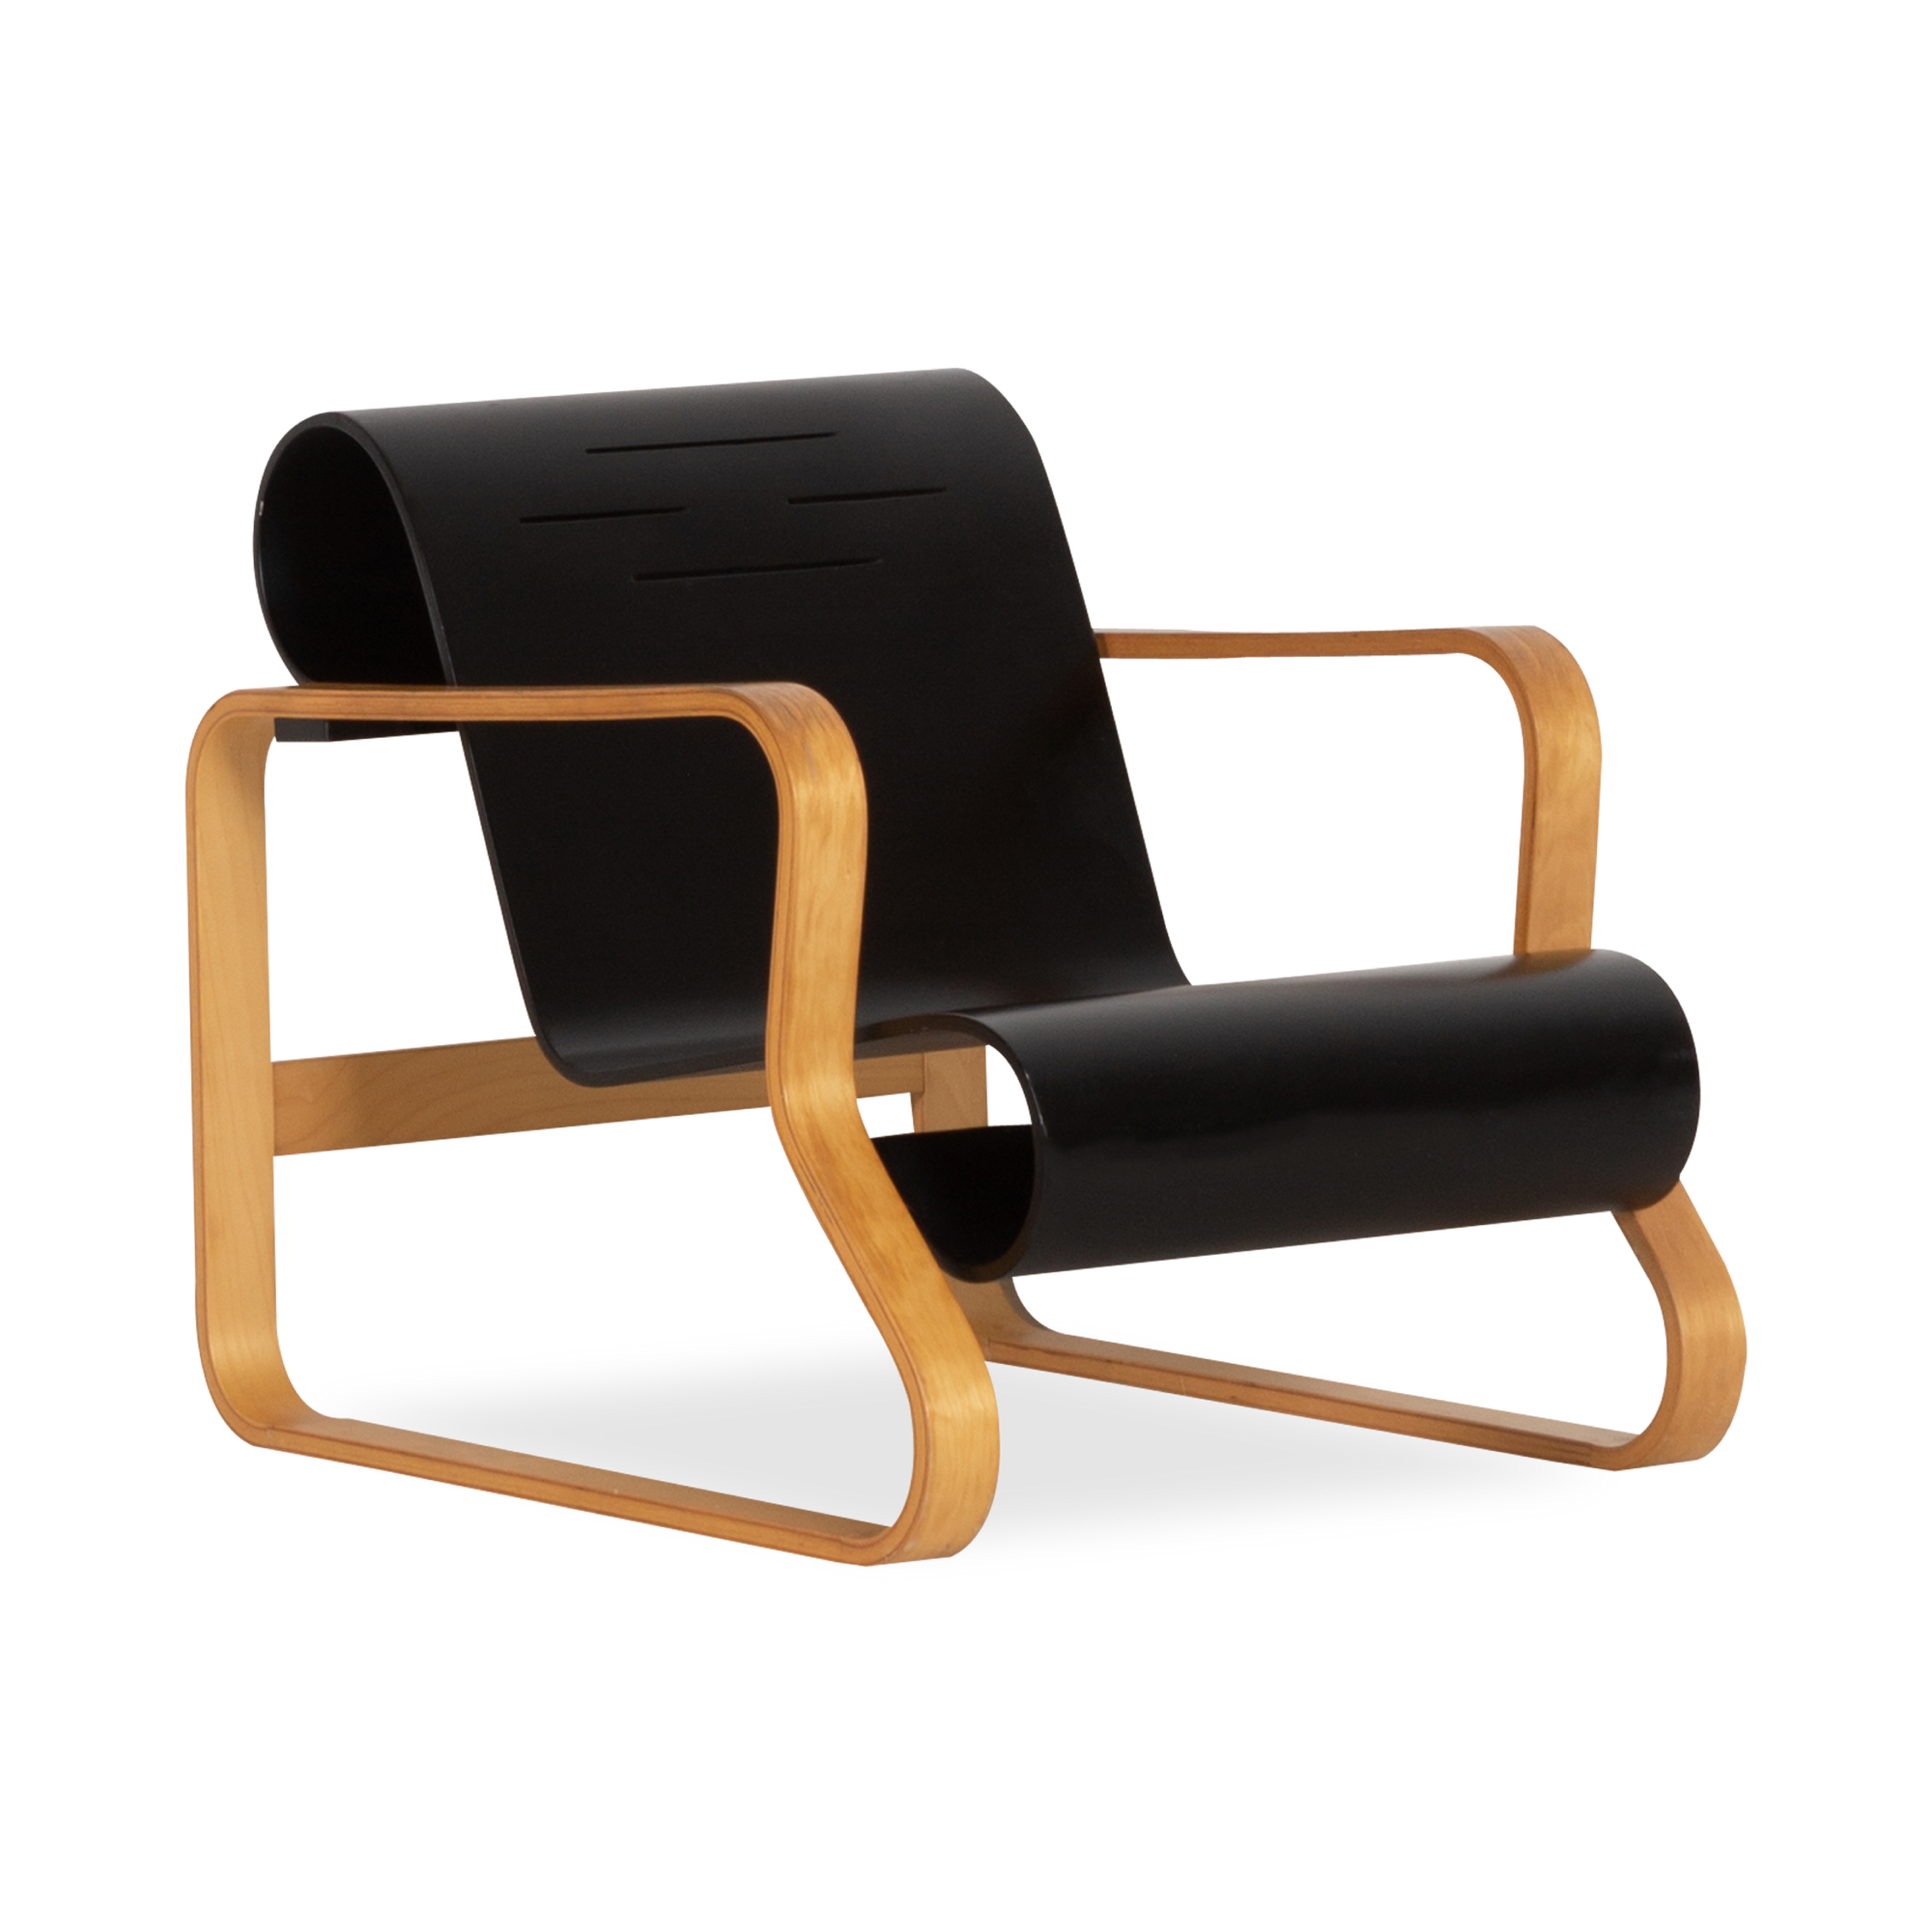 Designed in 1932 by Finnish architect and designer Alvar Aalto, the Paimio Lounge Chair was created to furnish the interior of a tuberculosis sanatorium in the Finnish city of Paim